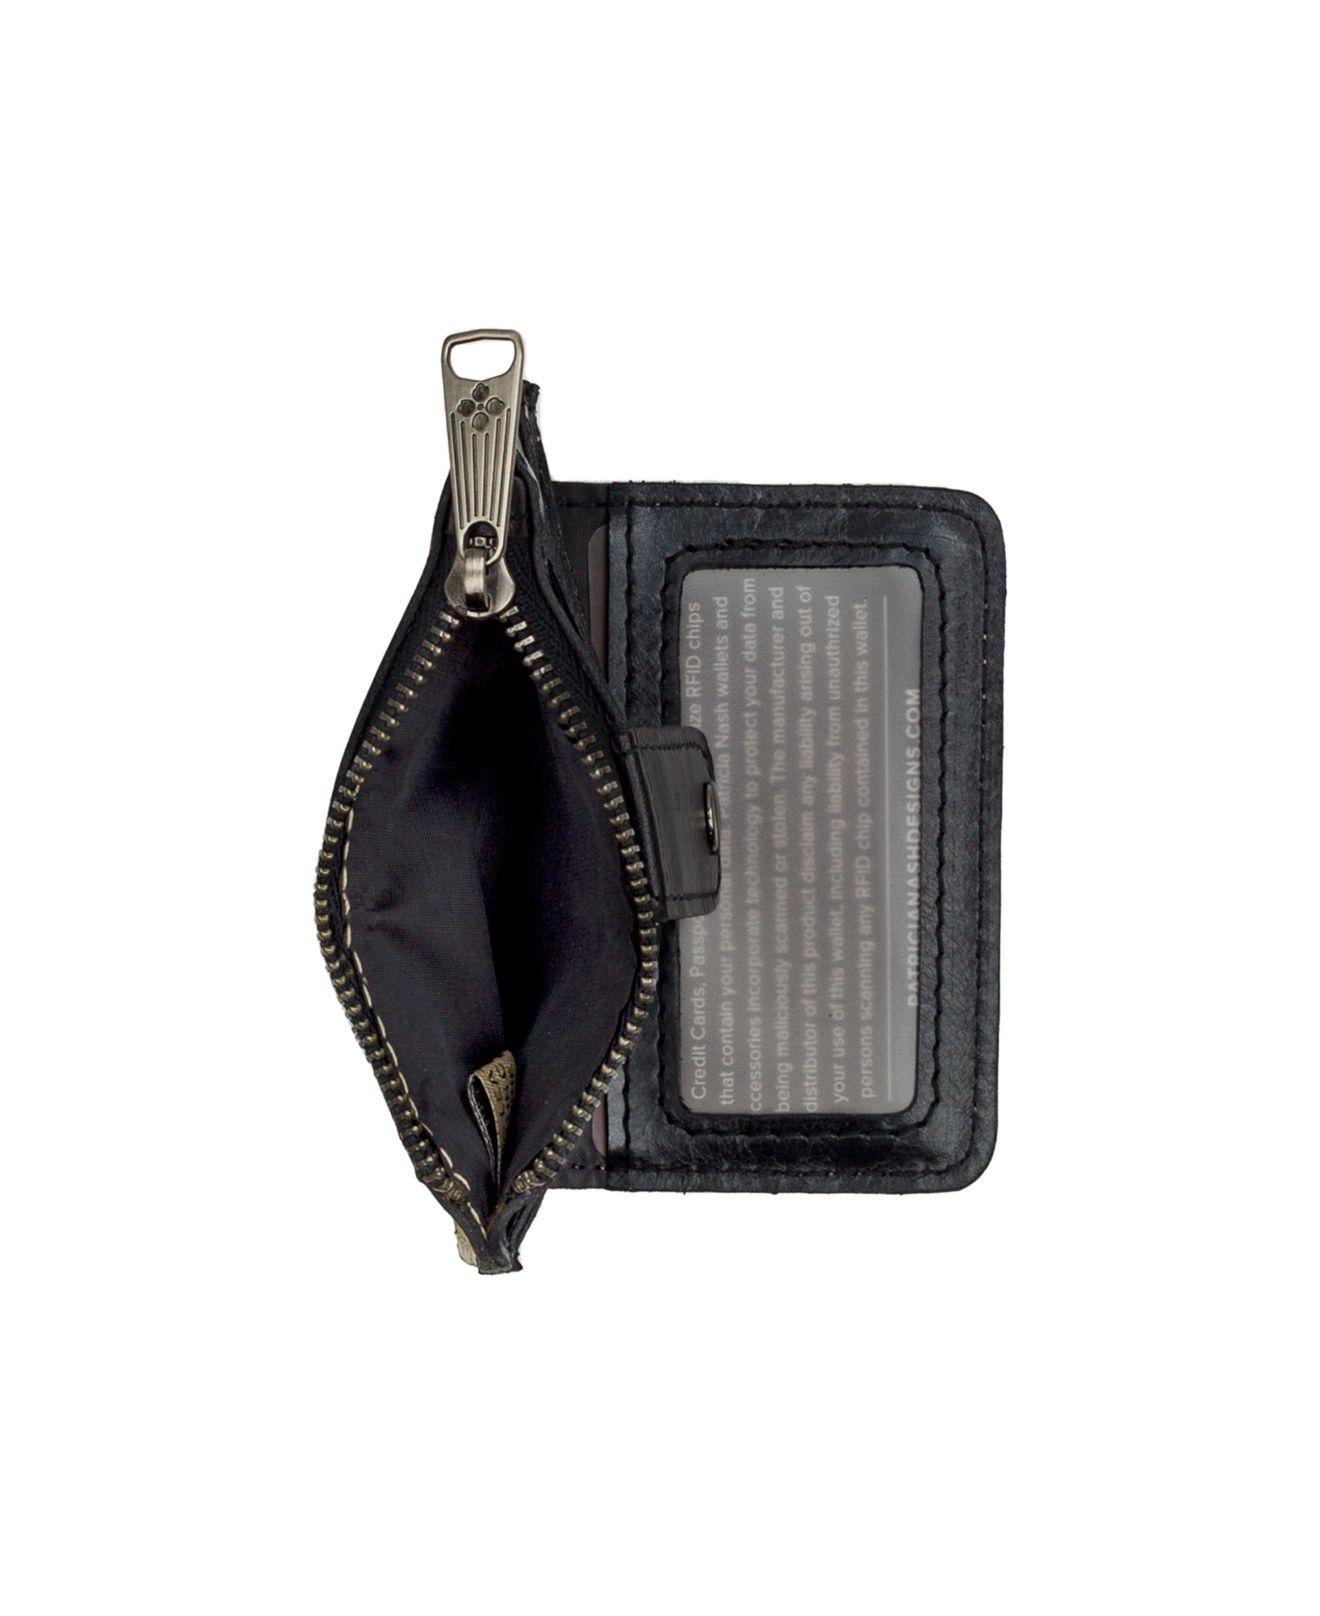 Patricia Nash Cassis Id Small Printed Leather Wallet in Black | Lyst